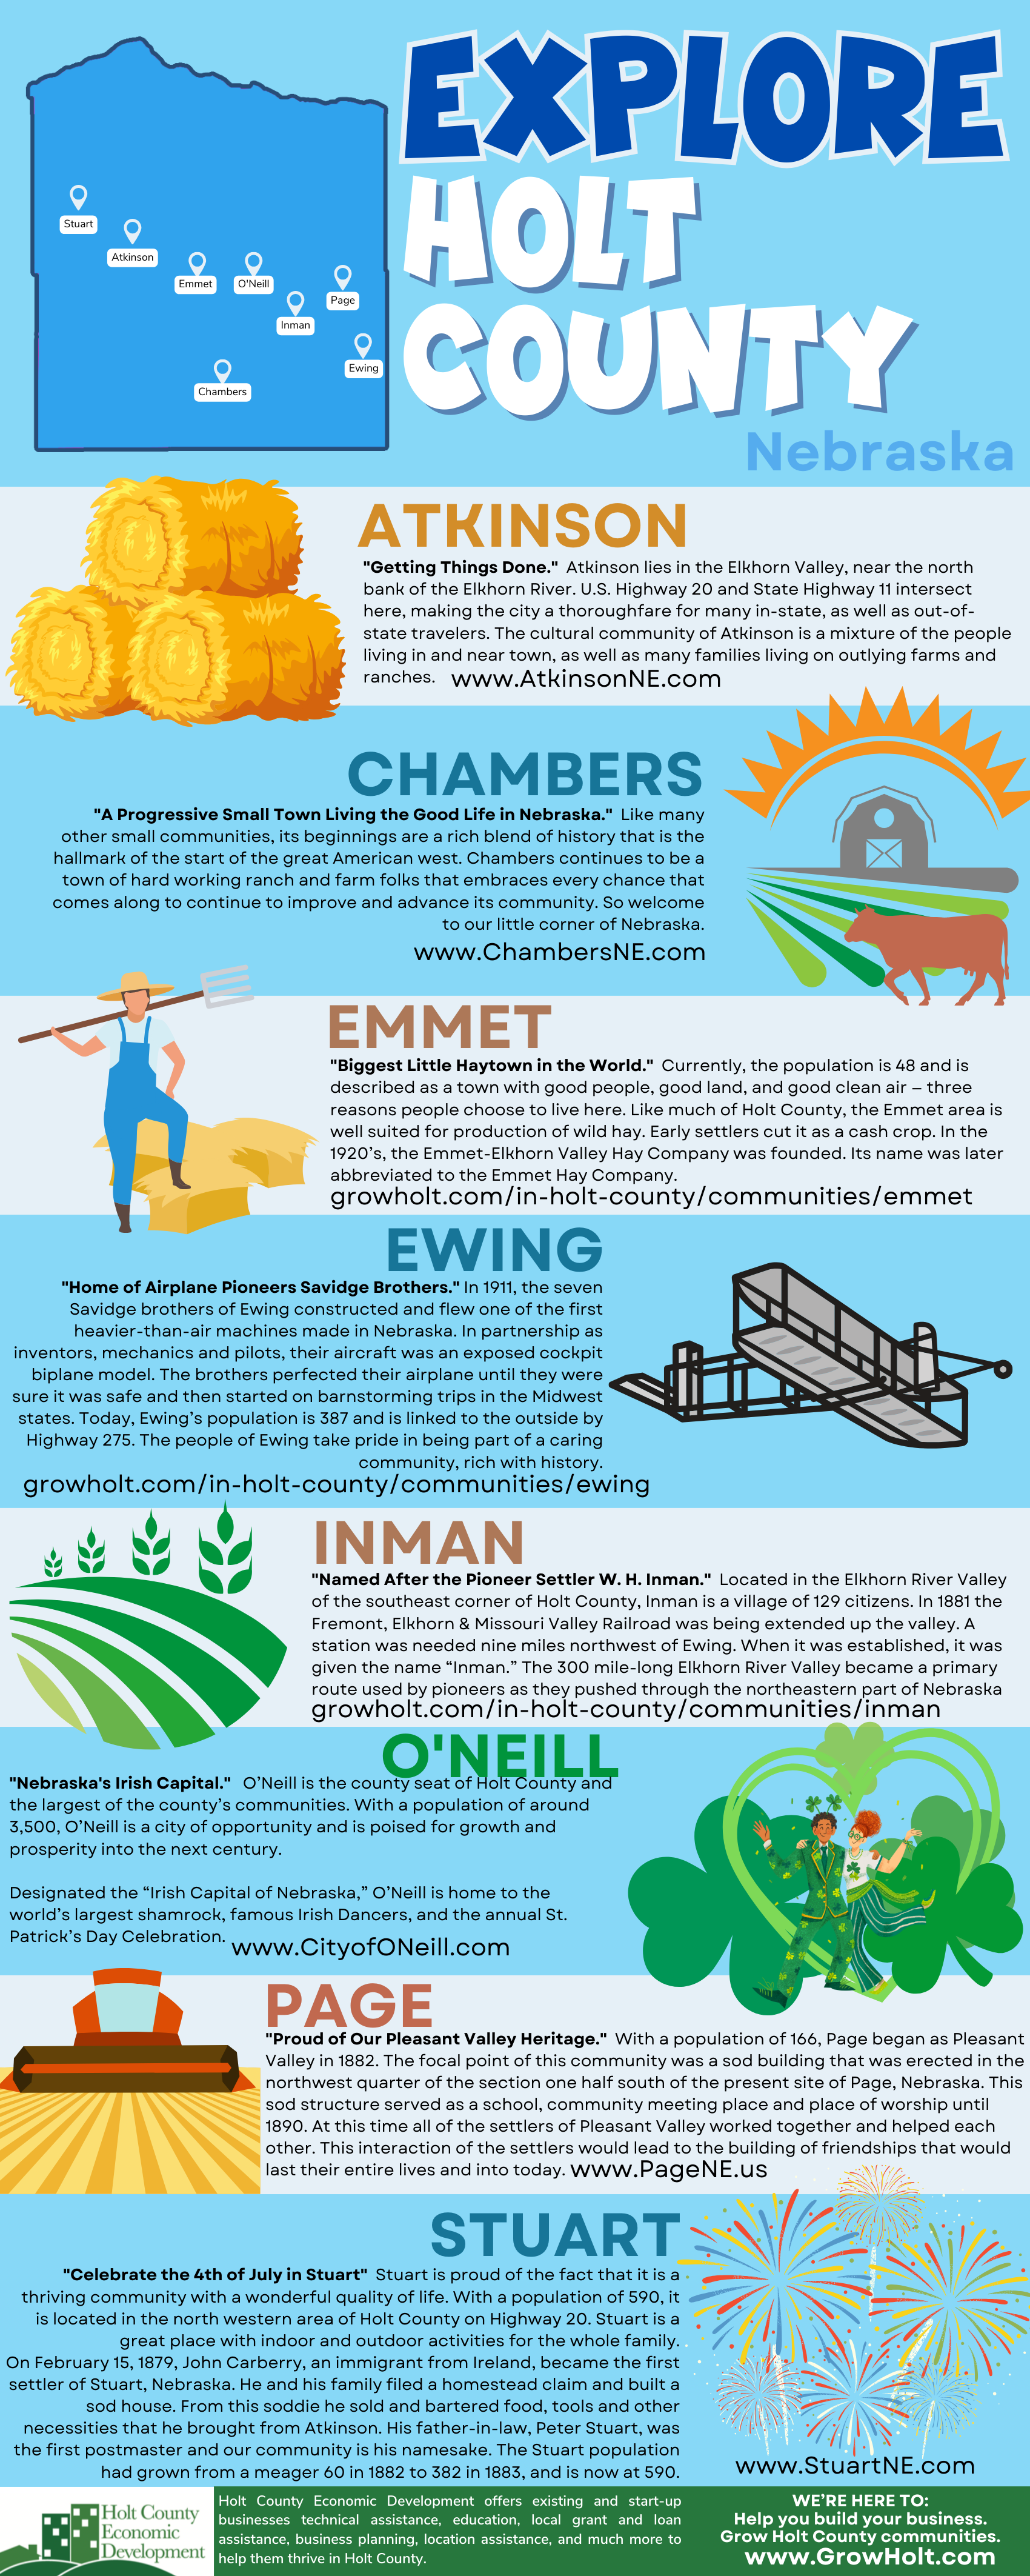 Explore Holt county infographic